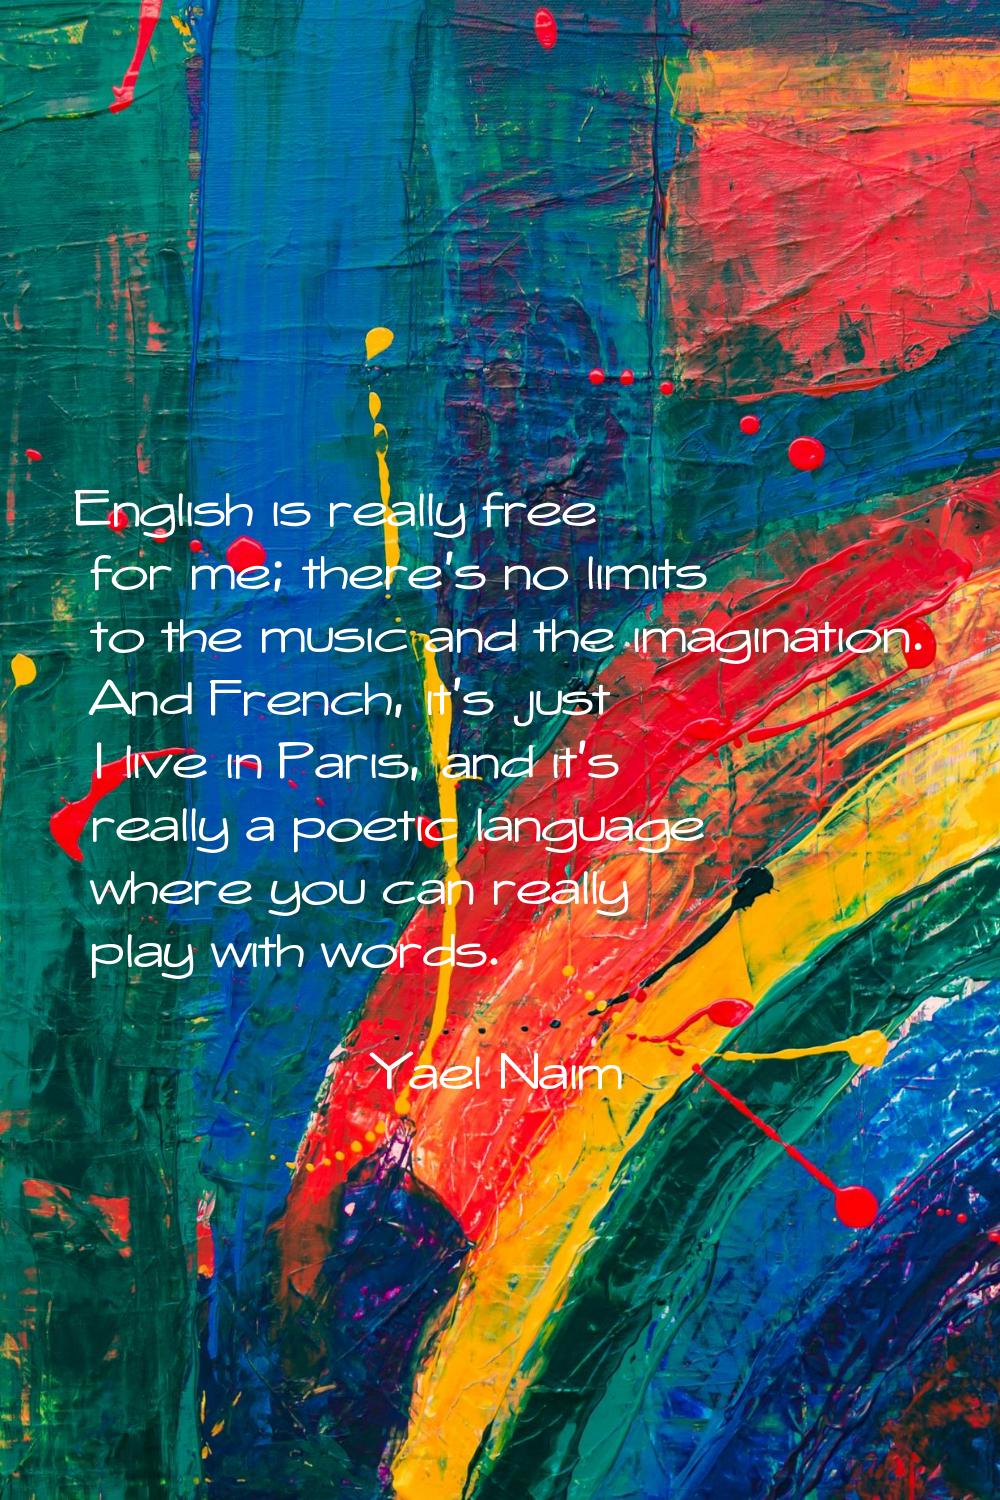 English is really free for me; there's no limits to the music and the imagination. And French, it's